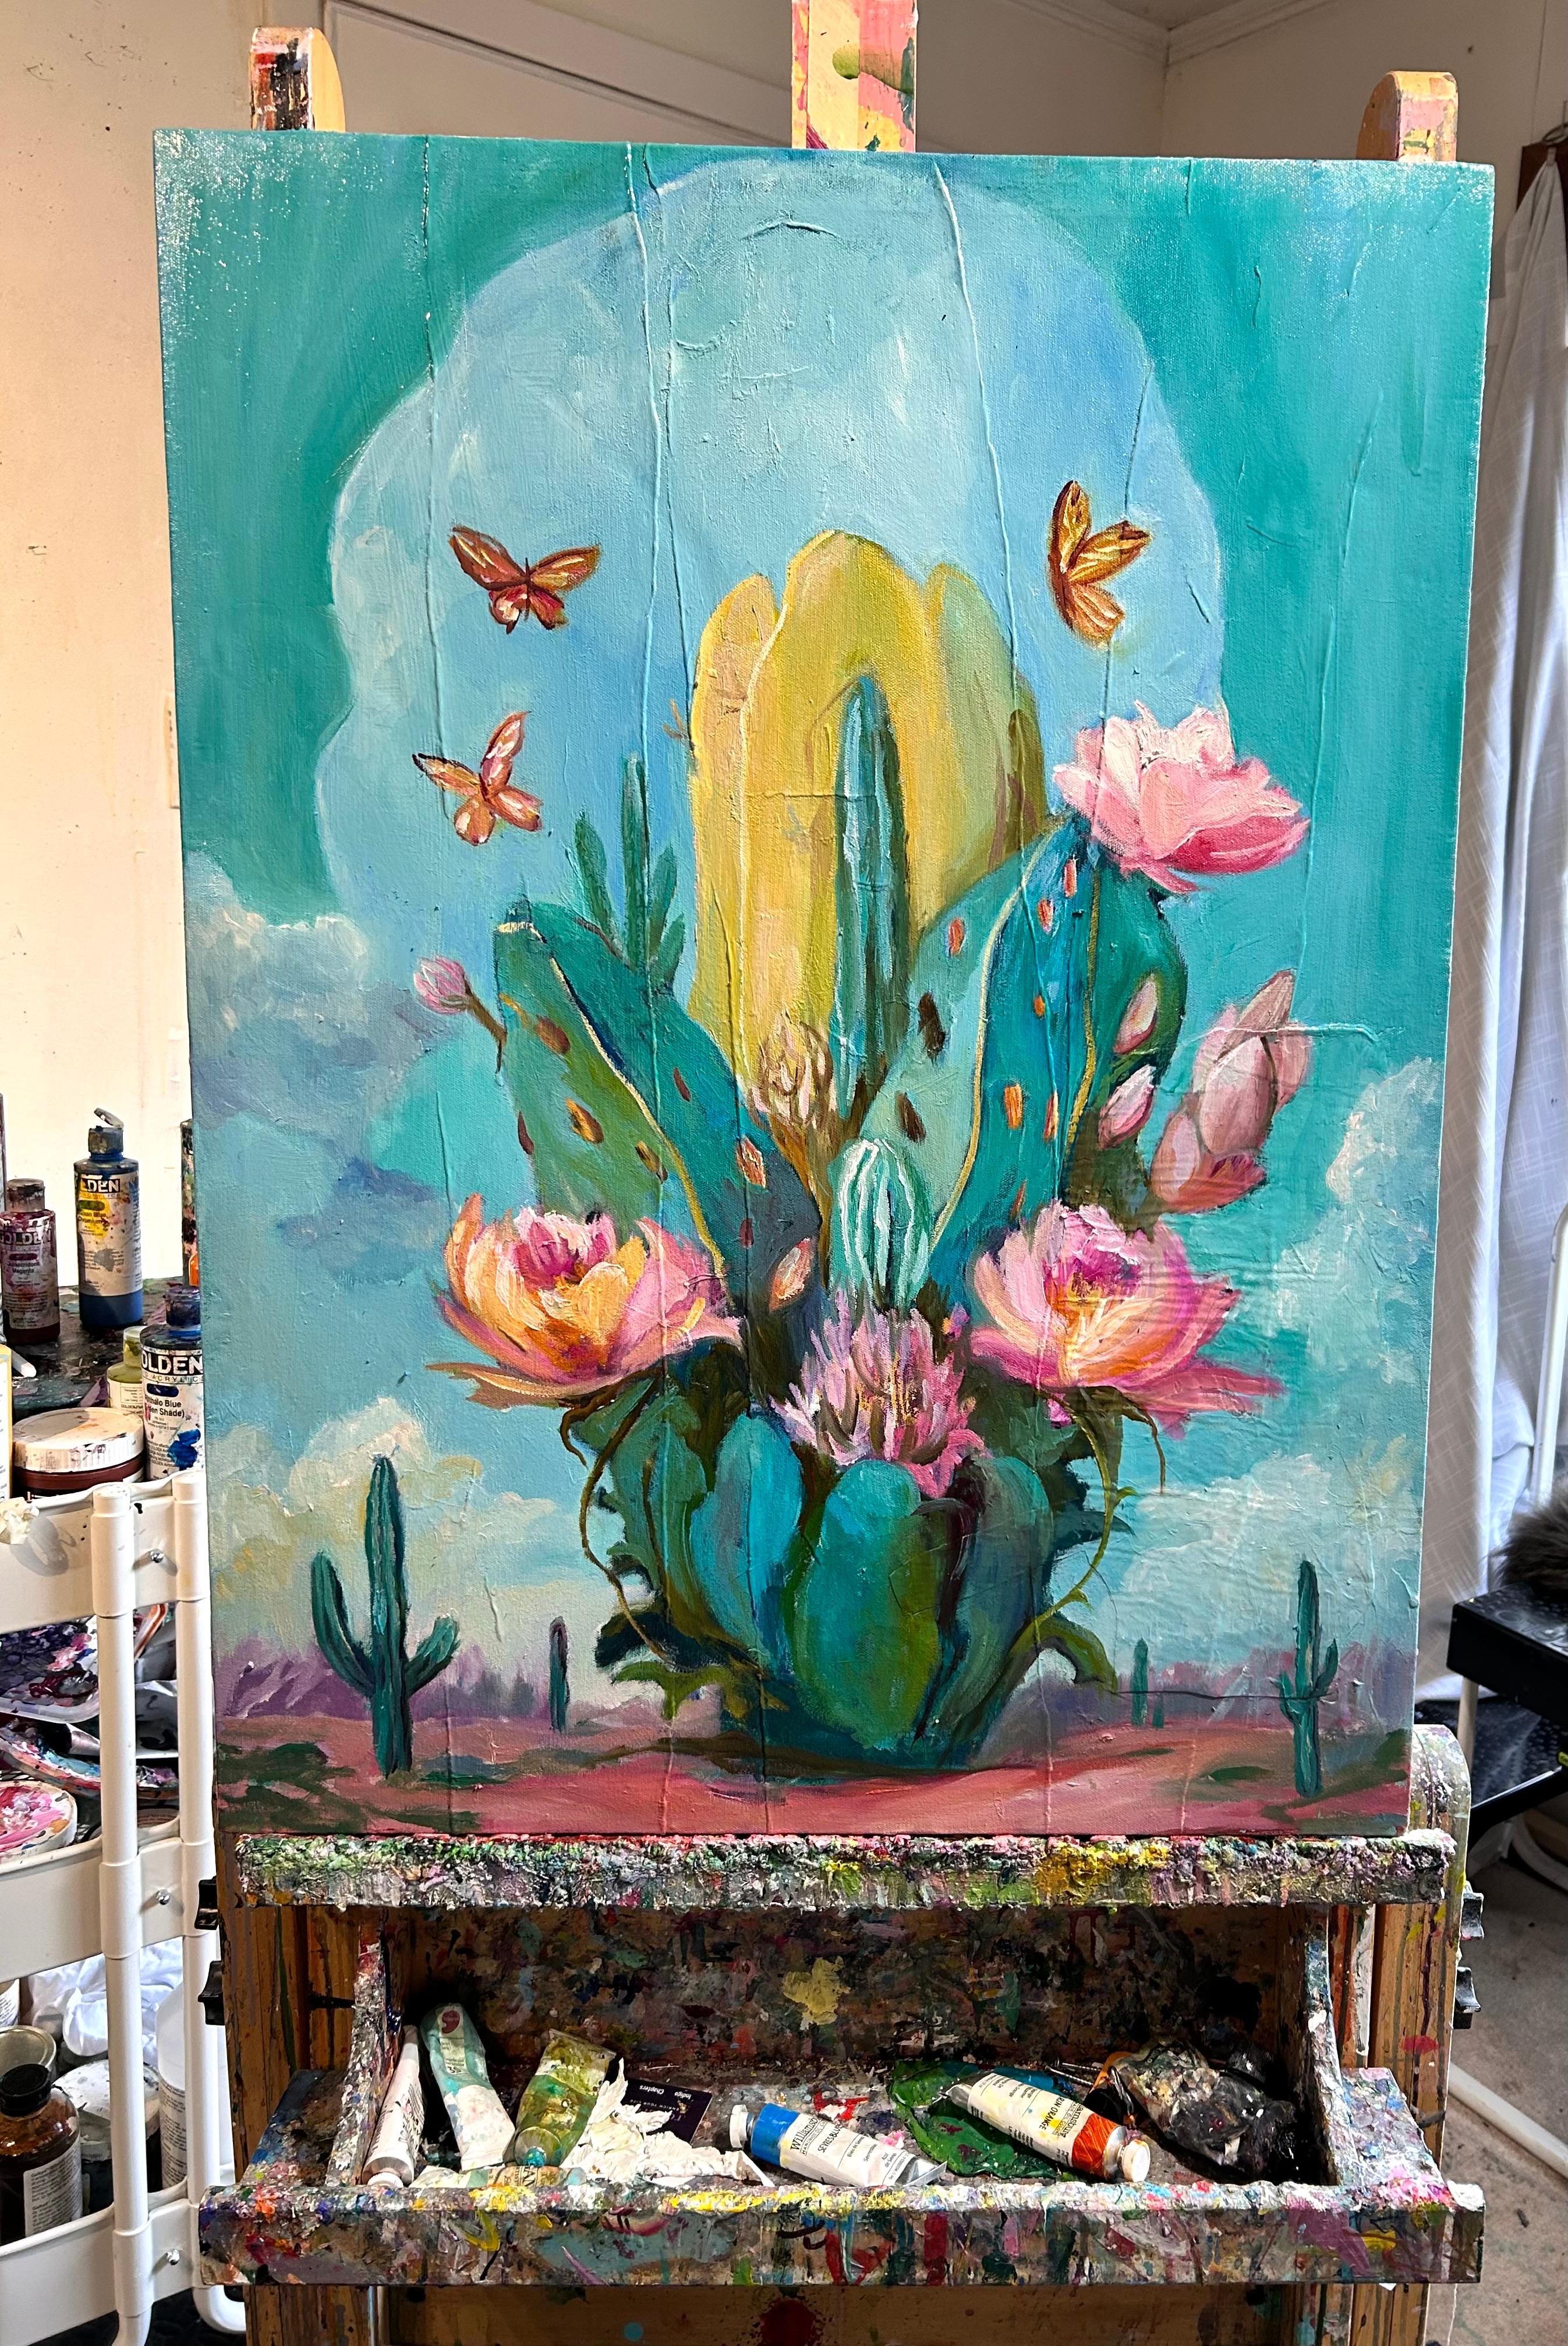 <p>Artist Comments<br>In this piece, artist Julia Hacker creates a whimsical and vivid dreamscape of a desert. 